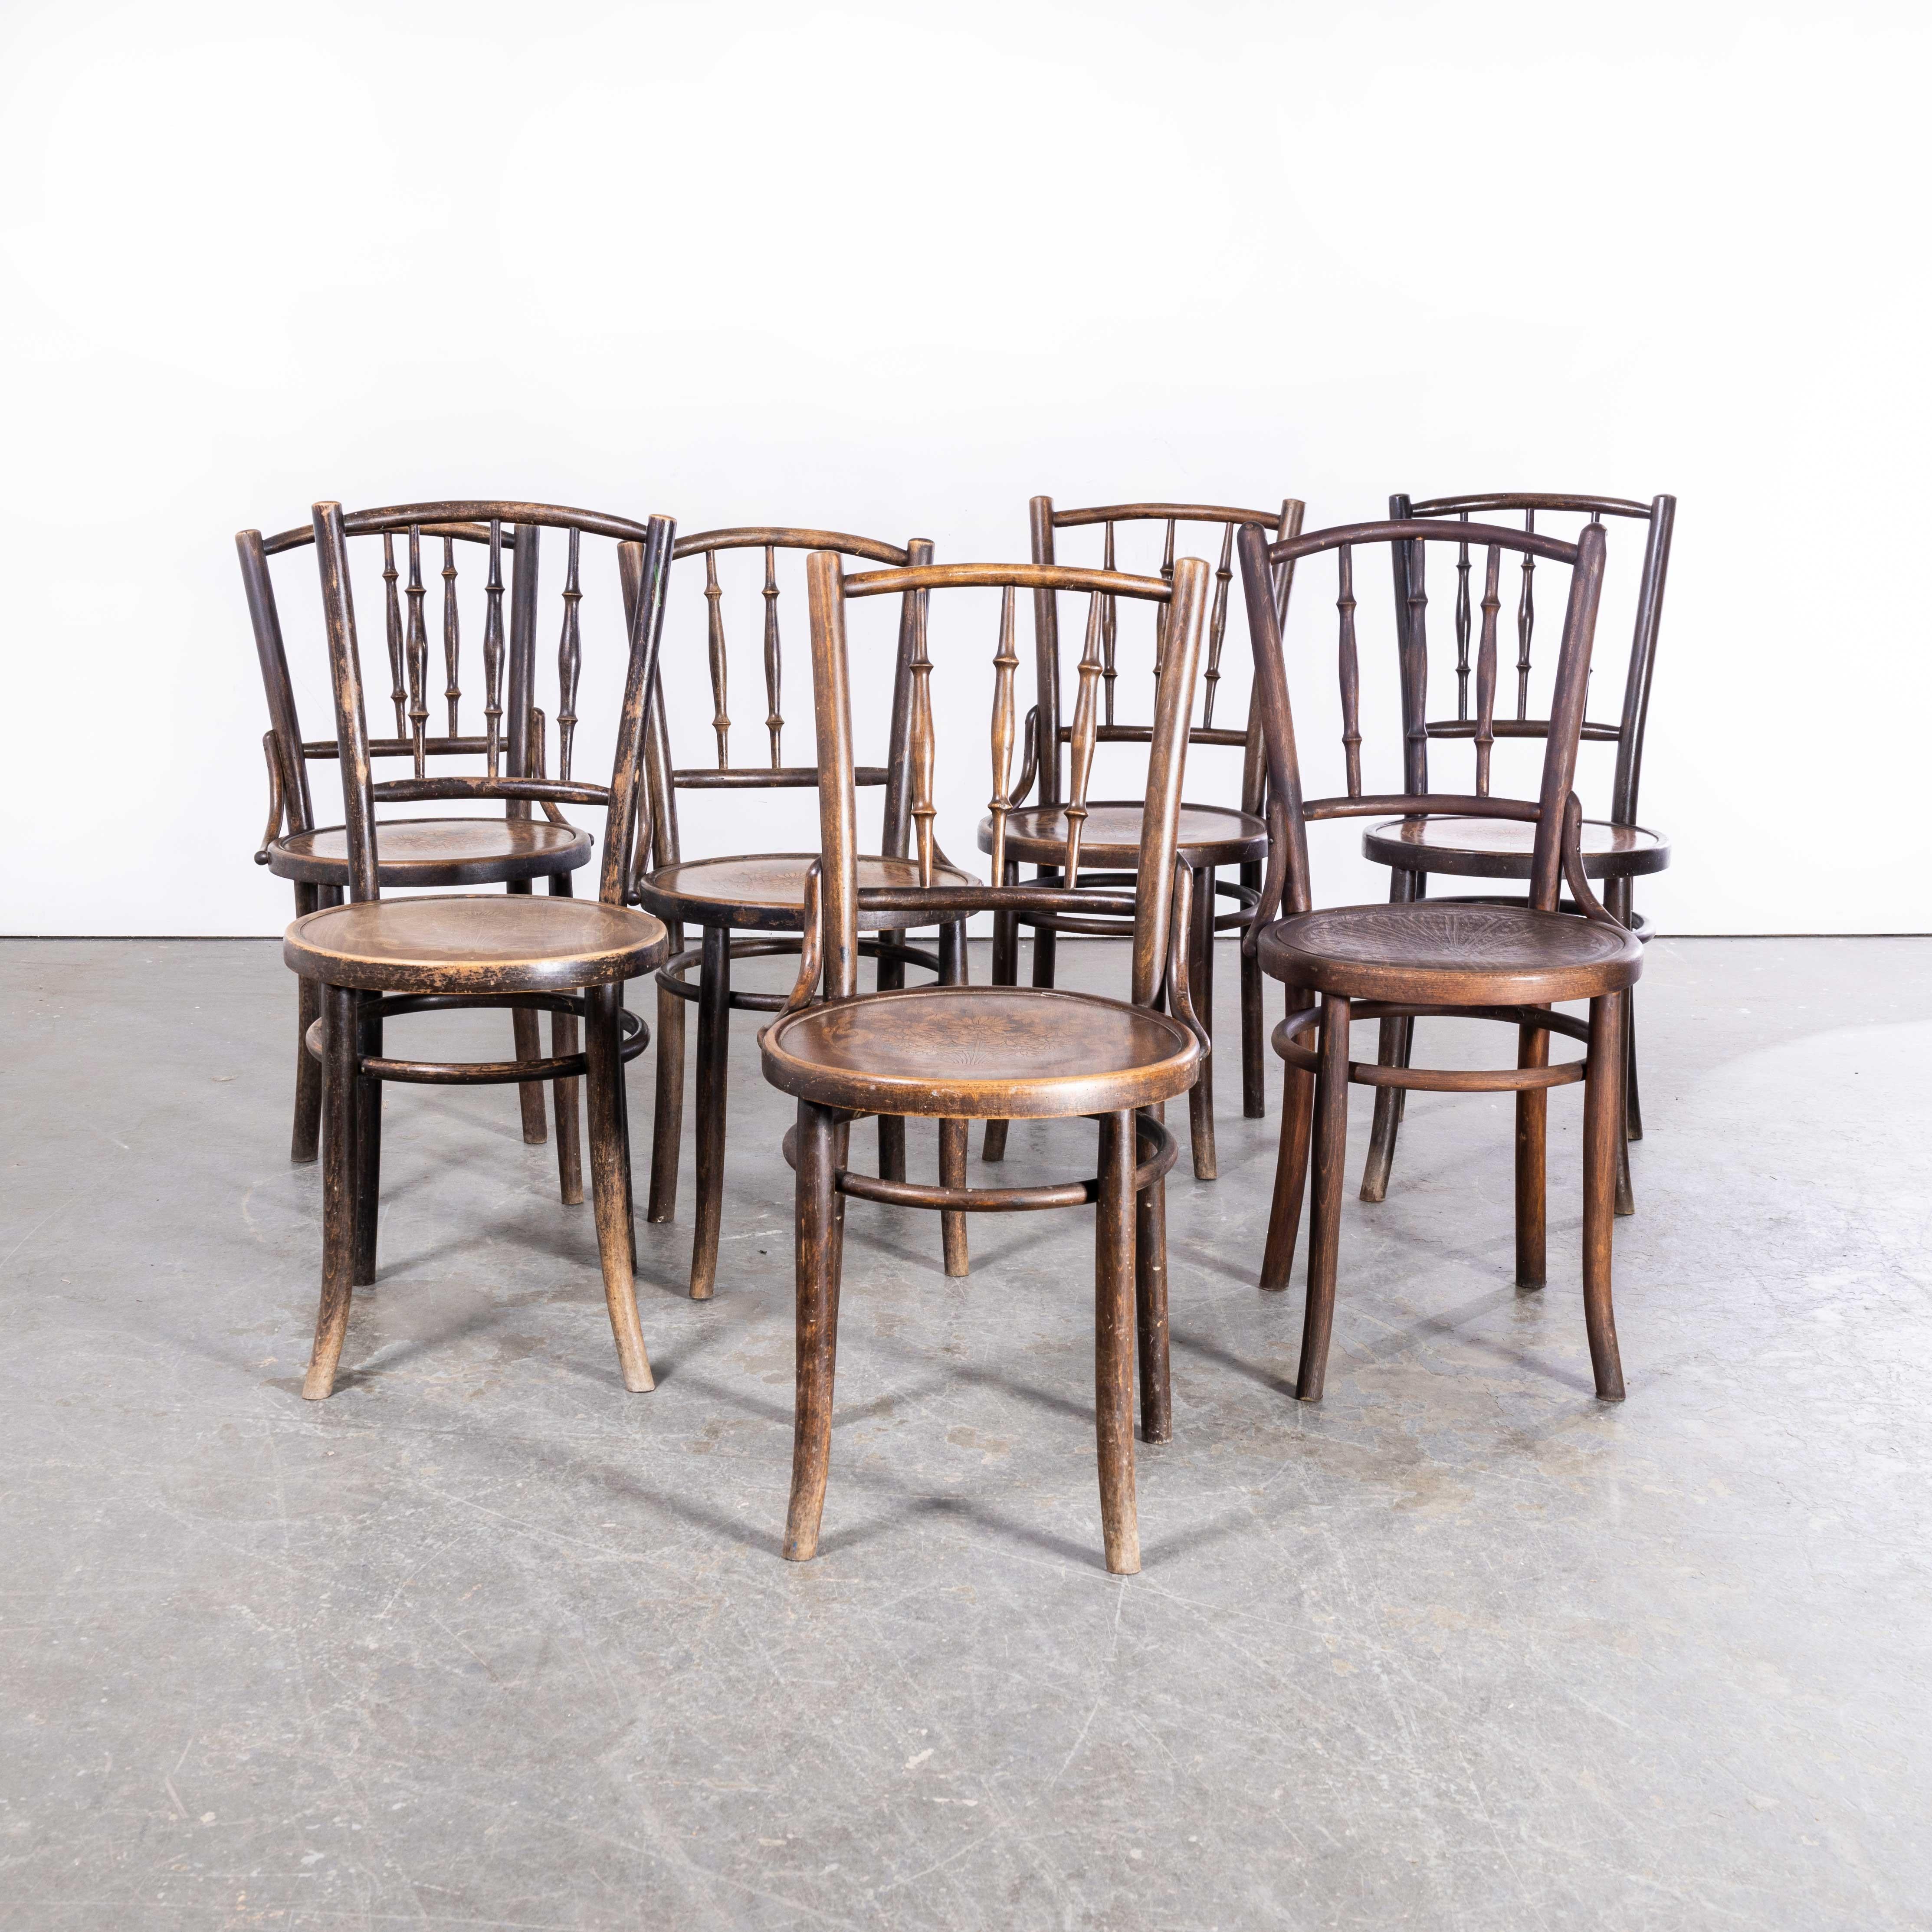 1940s Bentwood Debrecen Spindle dining chairs – Set Of Seven
1940s Bentwood Debrecen Spindle dining chairs – Set Of Seven. It is hard to be precise about the origin of these chairs as little history is known, but what we do know is at the beginning